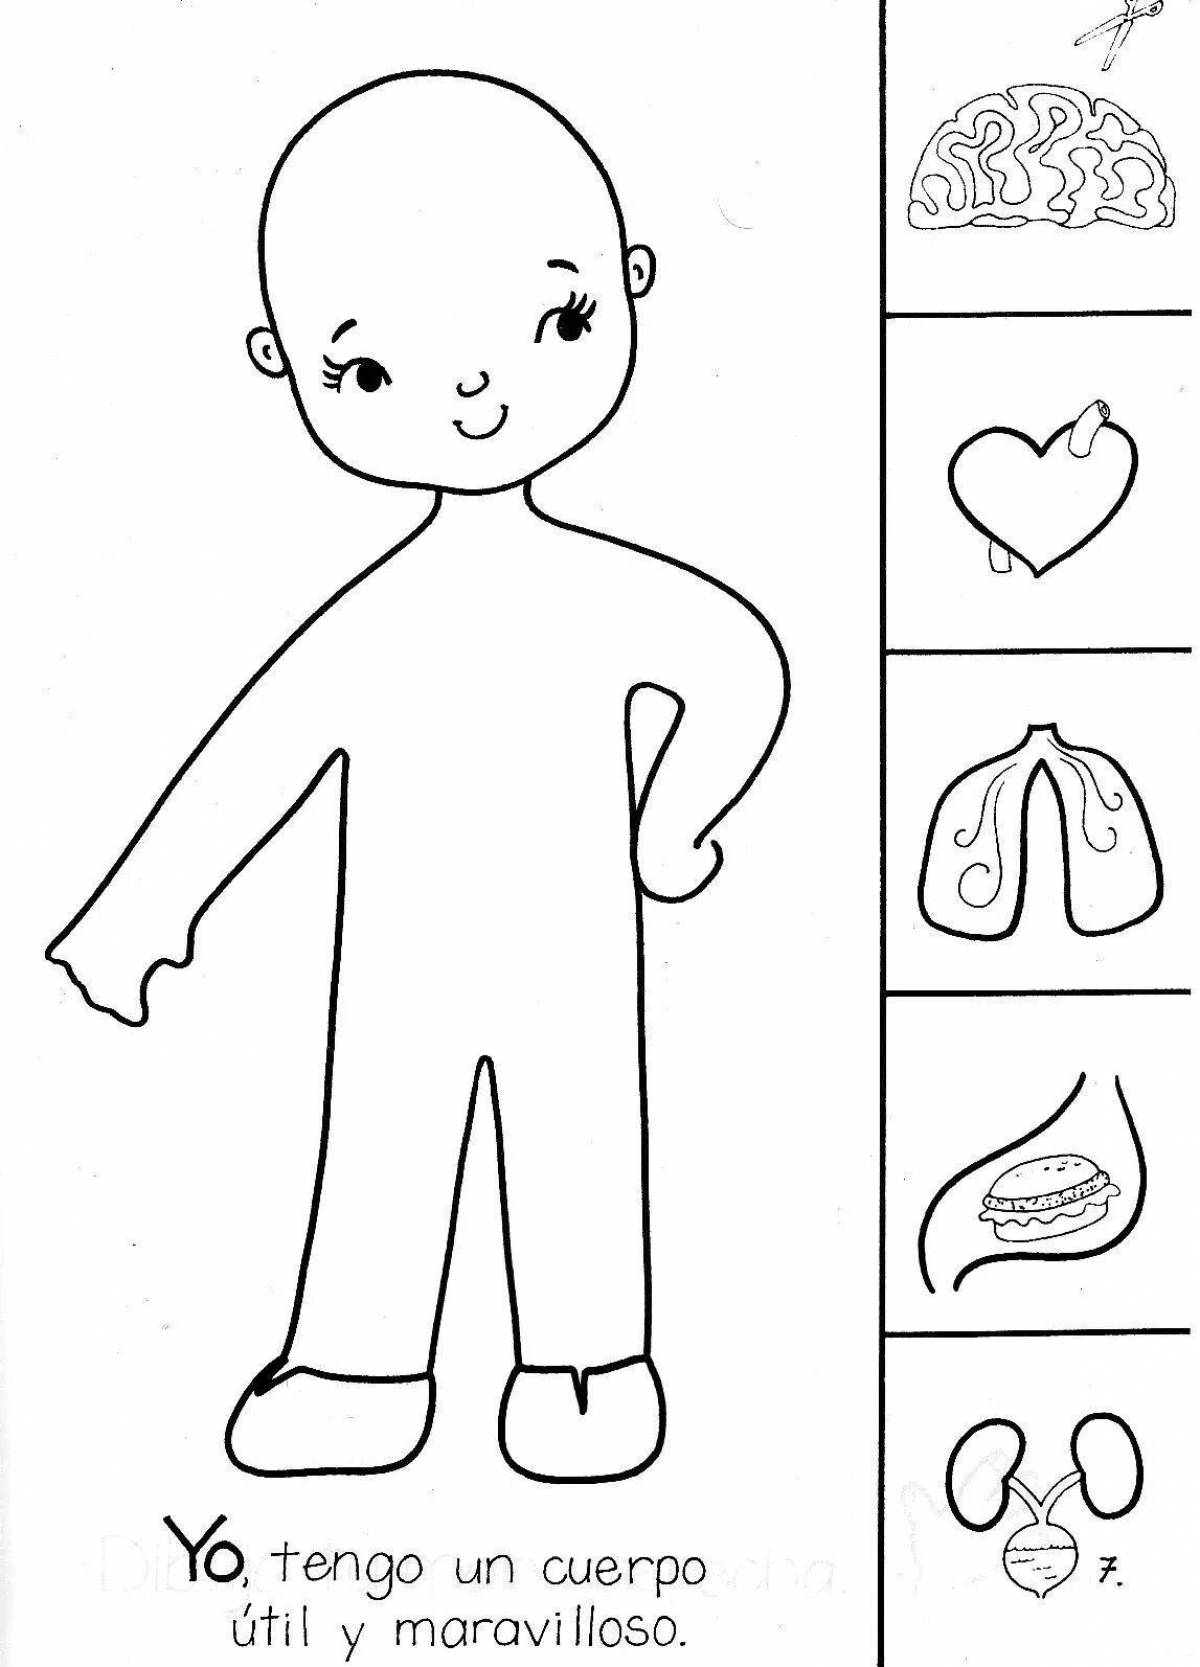 Amazing colored man silhouette coloring book for kids